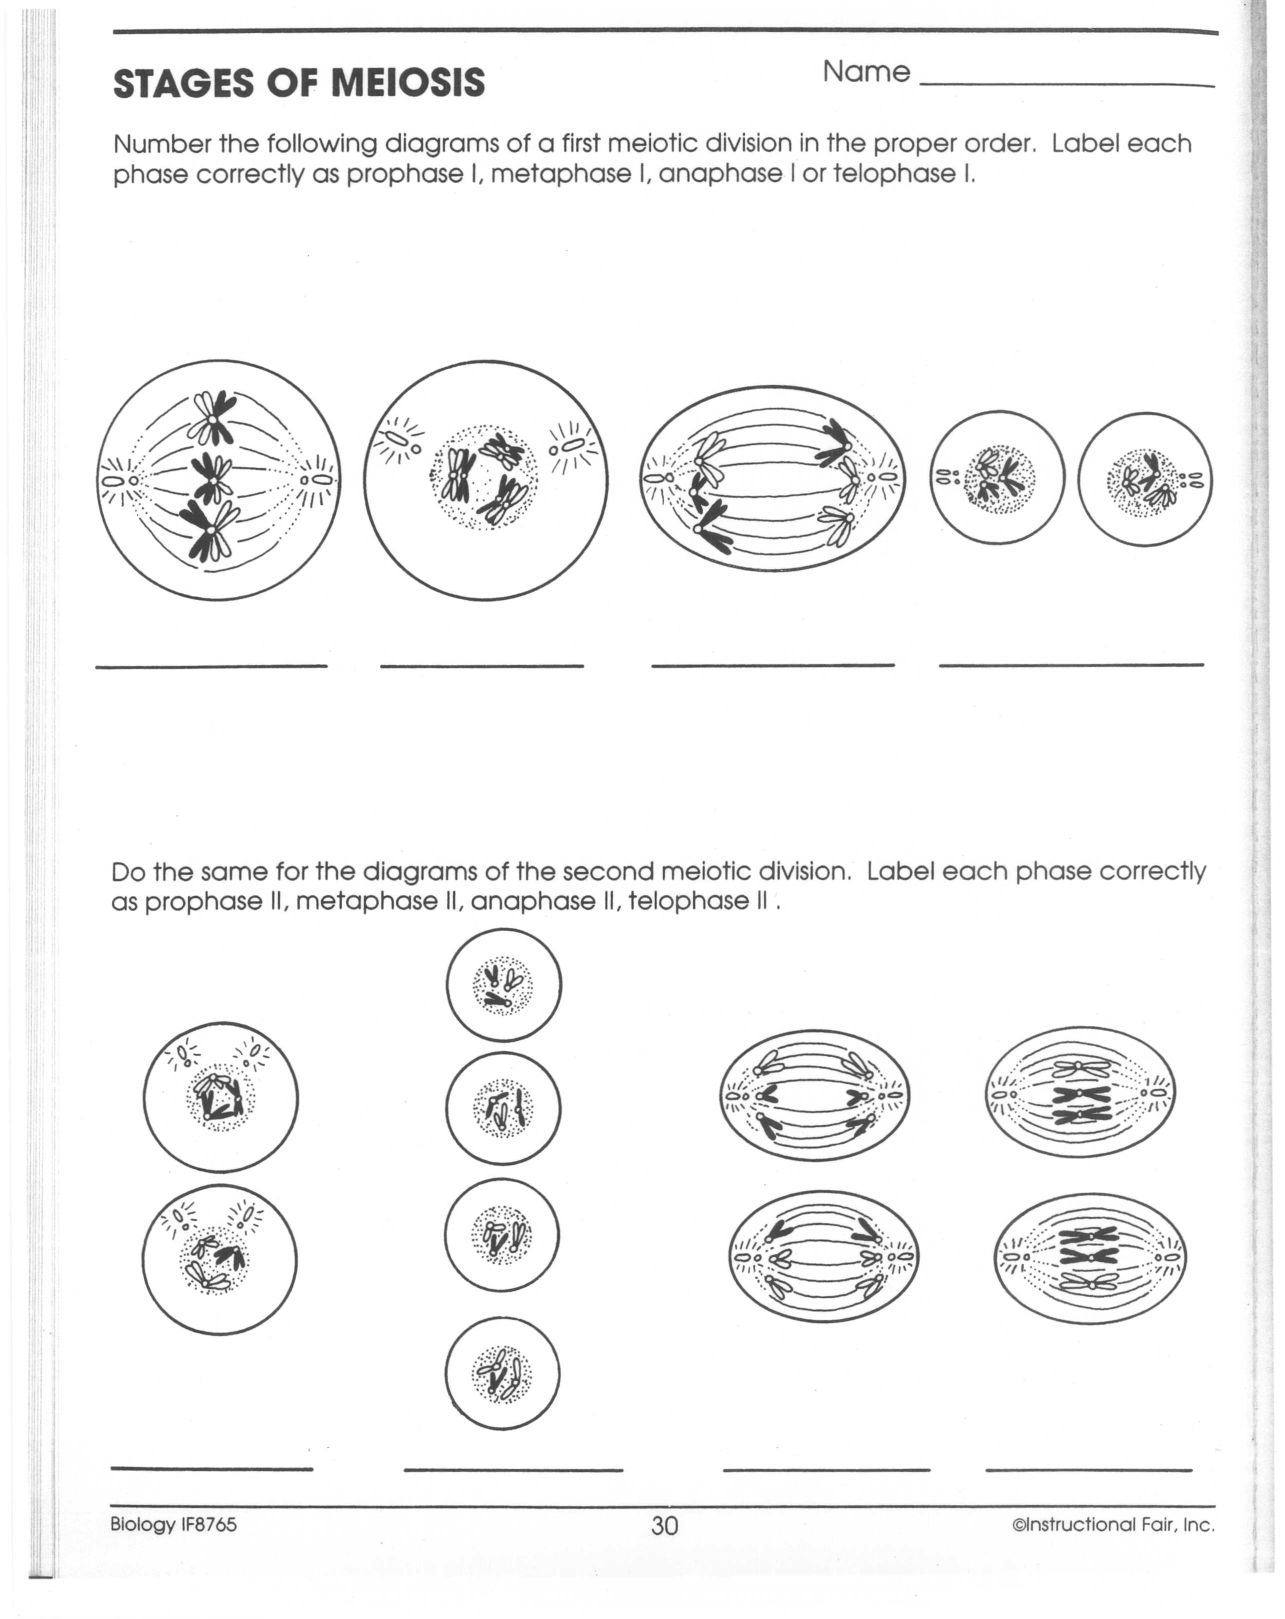 15 Best Images of Meiosis Stages Worksheet Answers